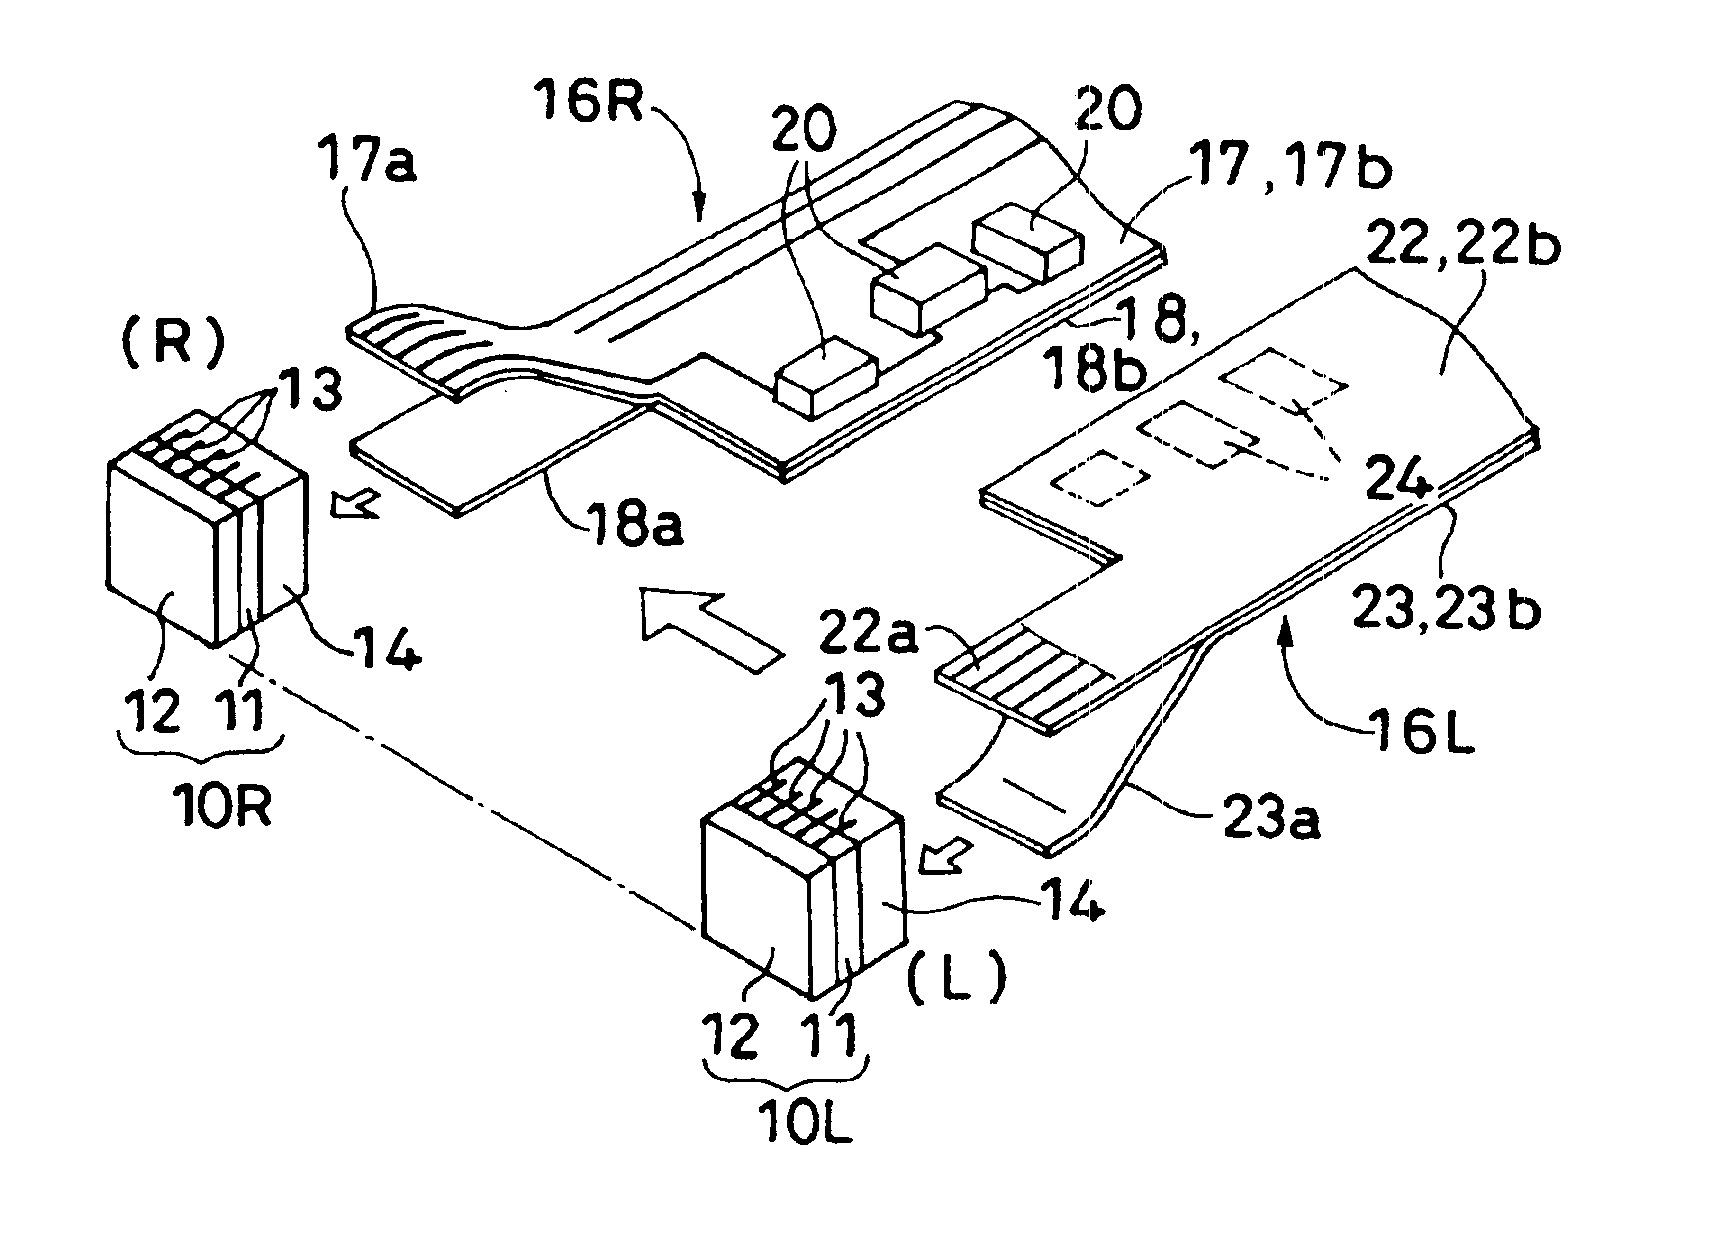 Imaging device assembly for electronic stereoscopic endoscope system